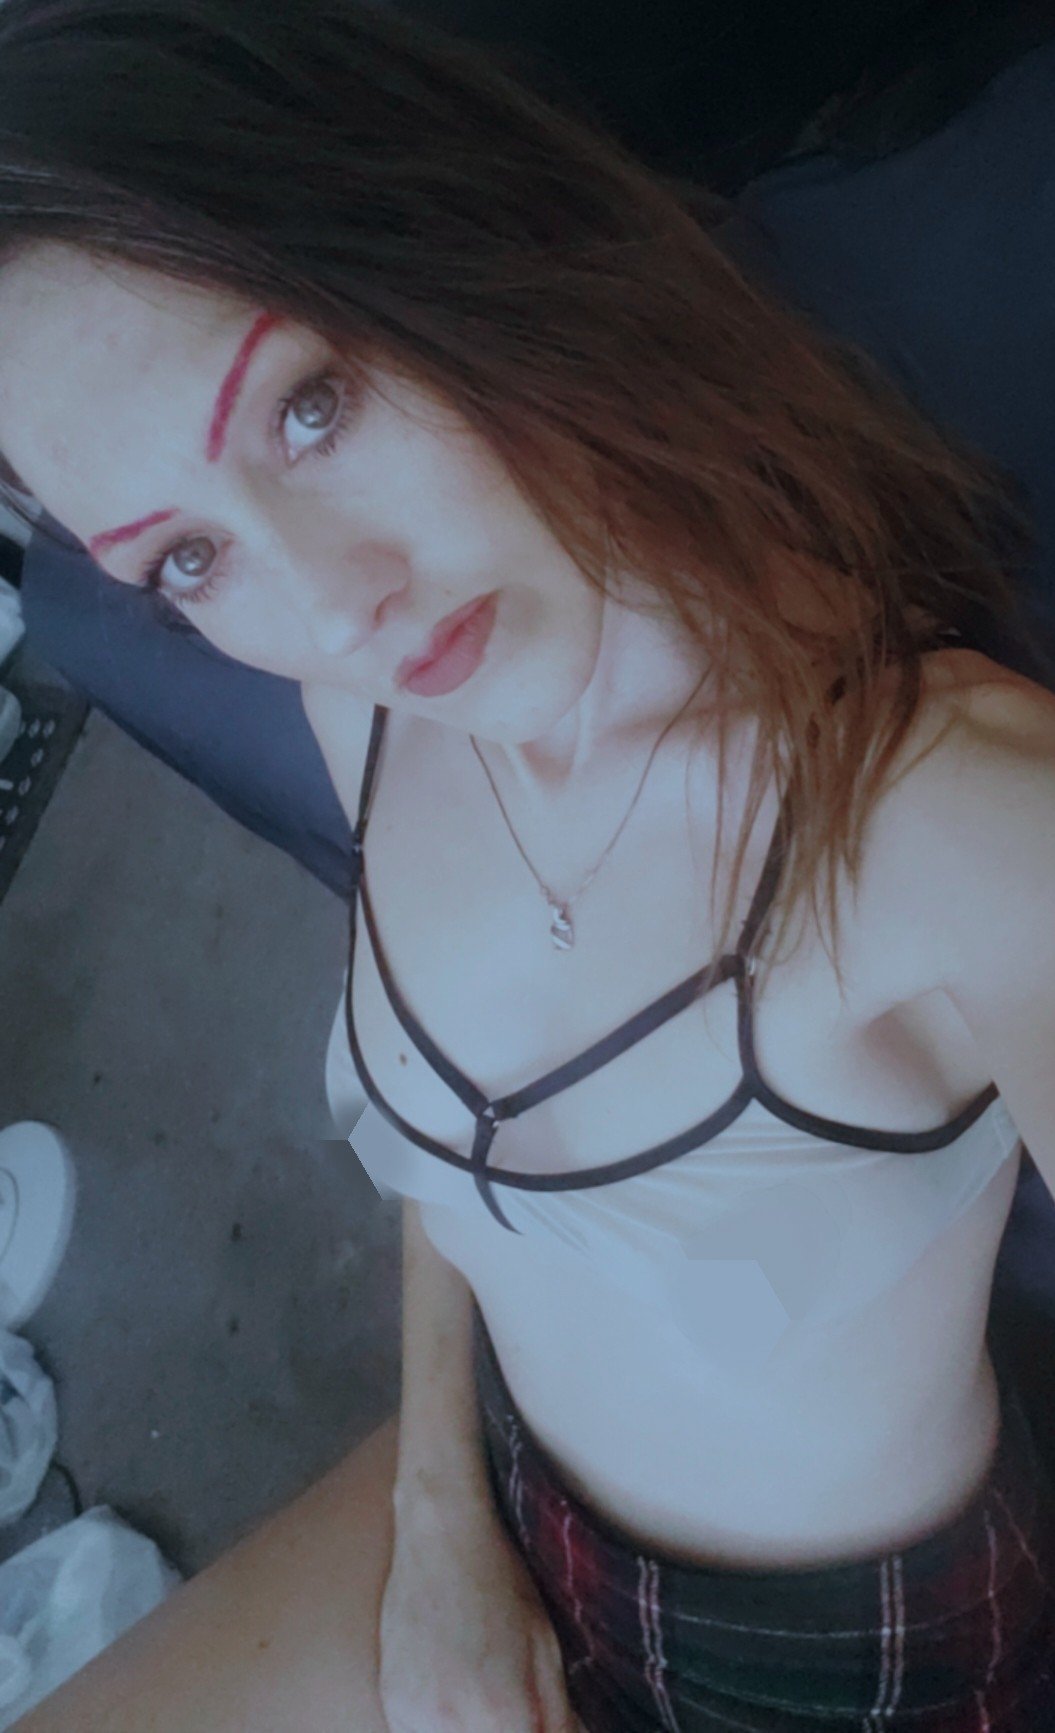 Watch the Photo by tylynn knixxon with the username @tylynnknixxon, who is a verified user, posted on September 30, 2020. The post is about the topic blow clouds. and the text says 'chaturbate: tylynn_knixxon
#chaturbate #cloudy #spun #waxplay #wax #makeup #longlegs #kneehighs #amateur #bigtits #camgirl'